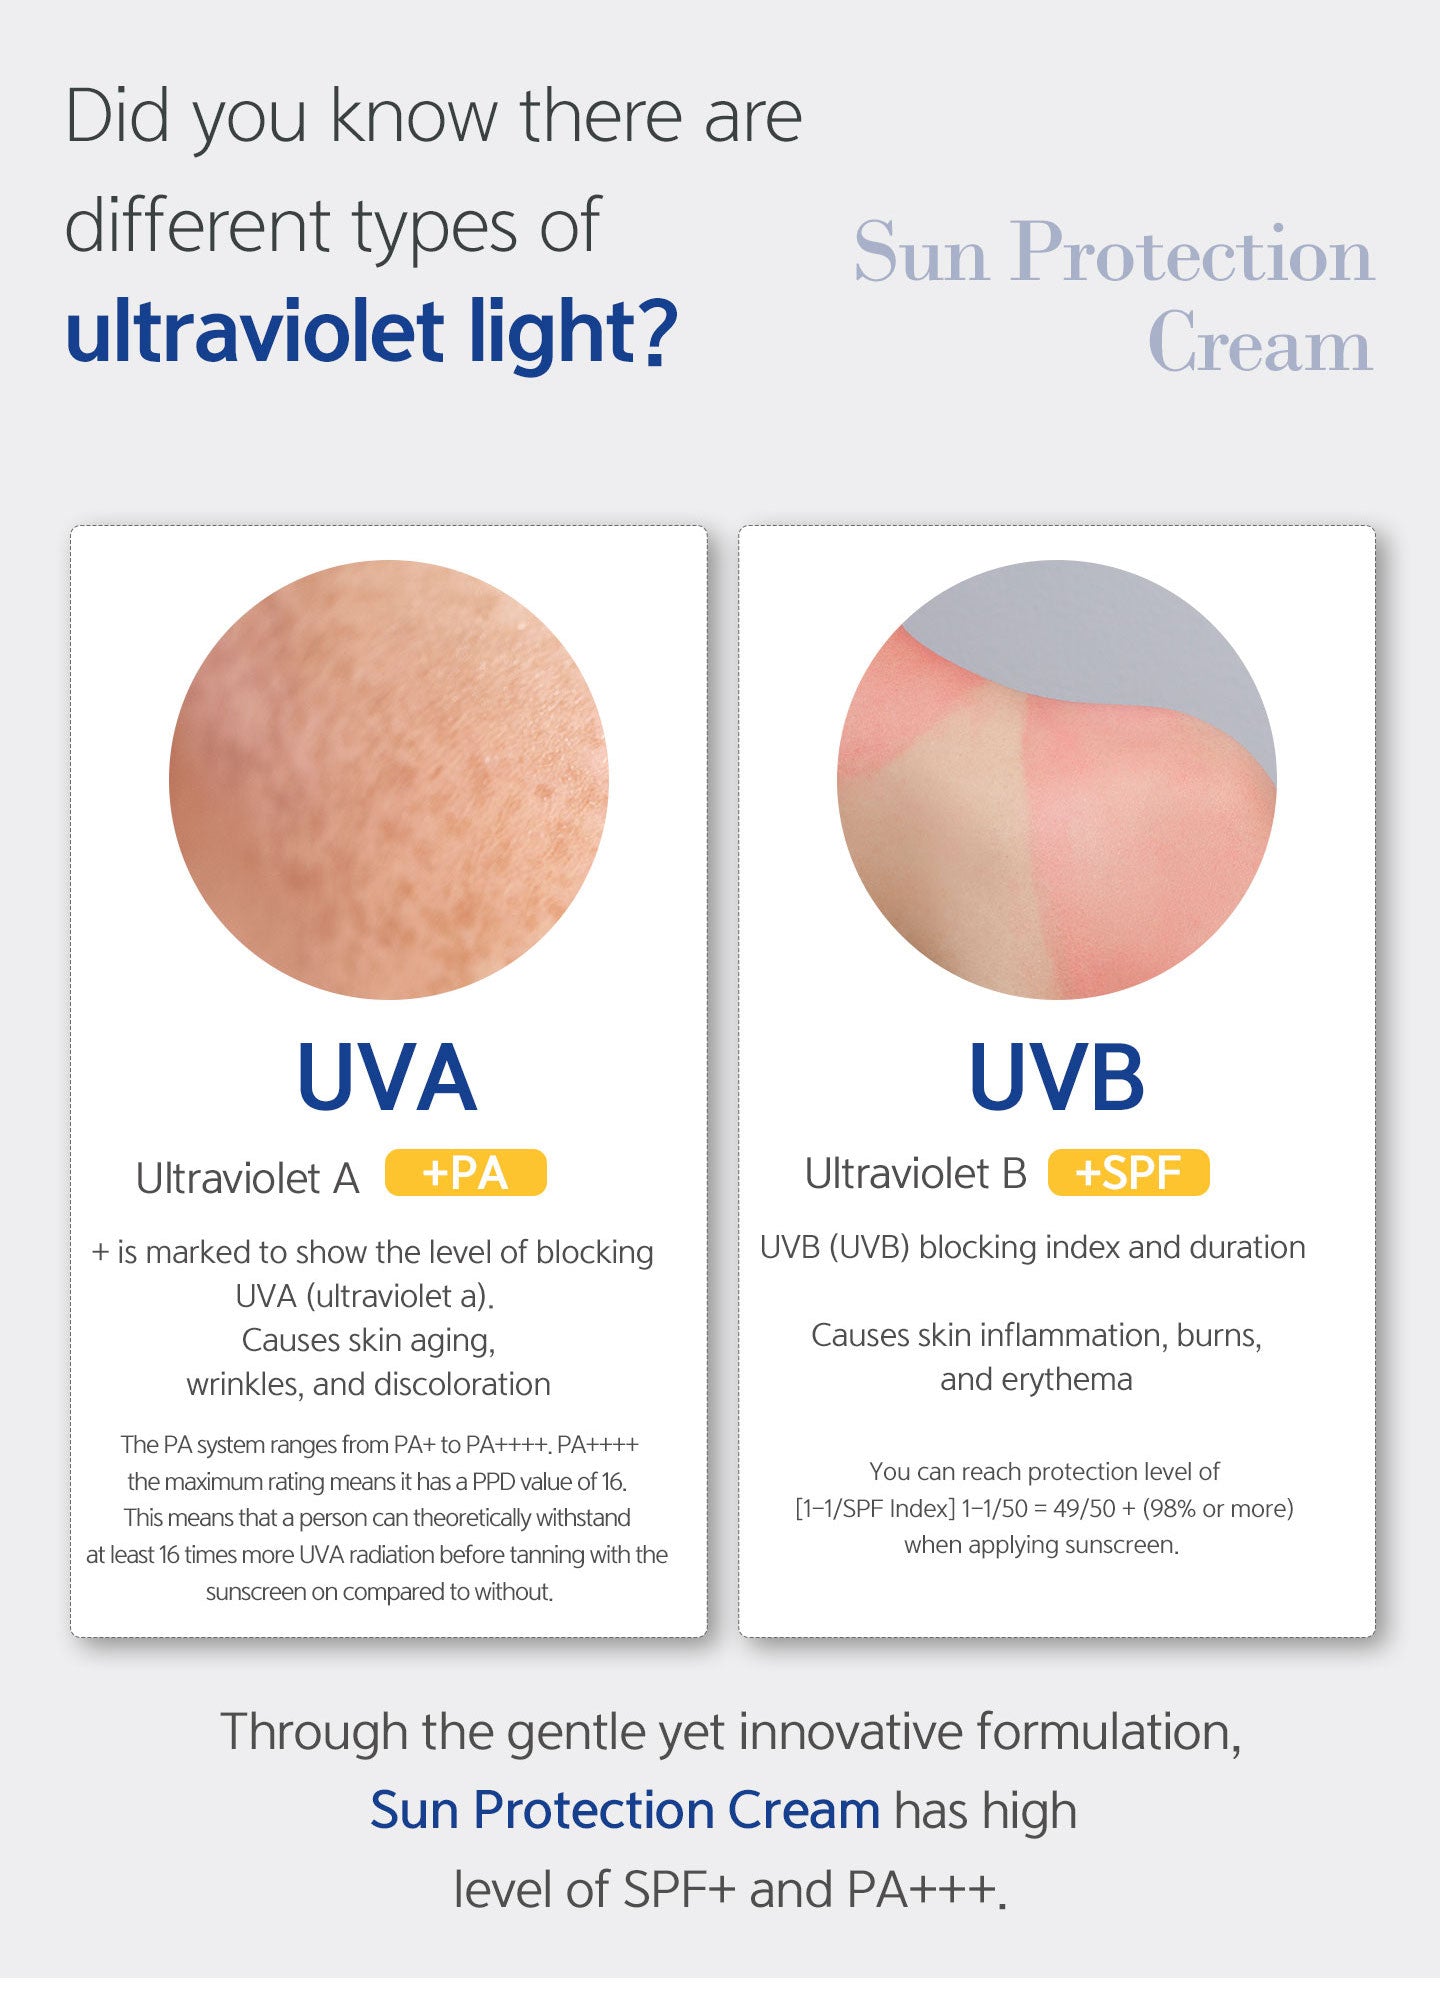 Through the gentle yet innovative formulation, sun protection cream has high level of SPF+ and PA+++. UVA causes skin aging, wrinkles, and discoloration. UVB causes skin inflammation, burns and erythema. 